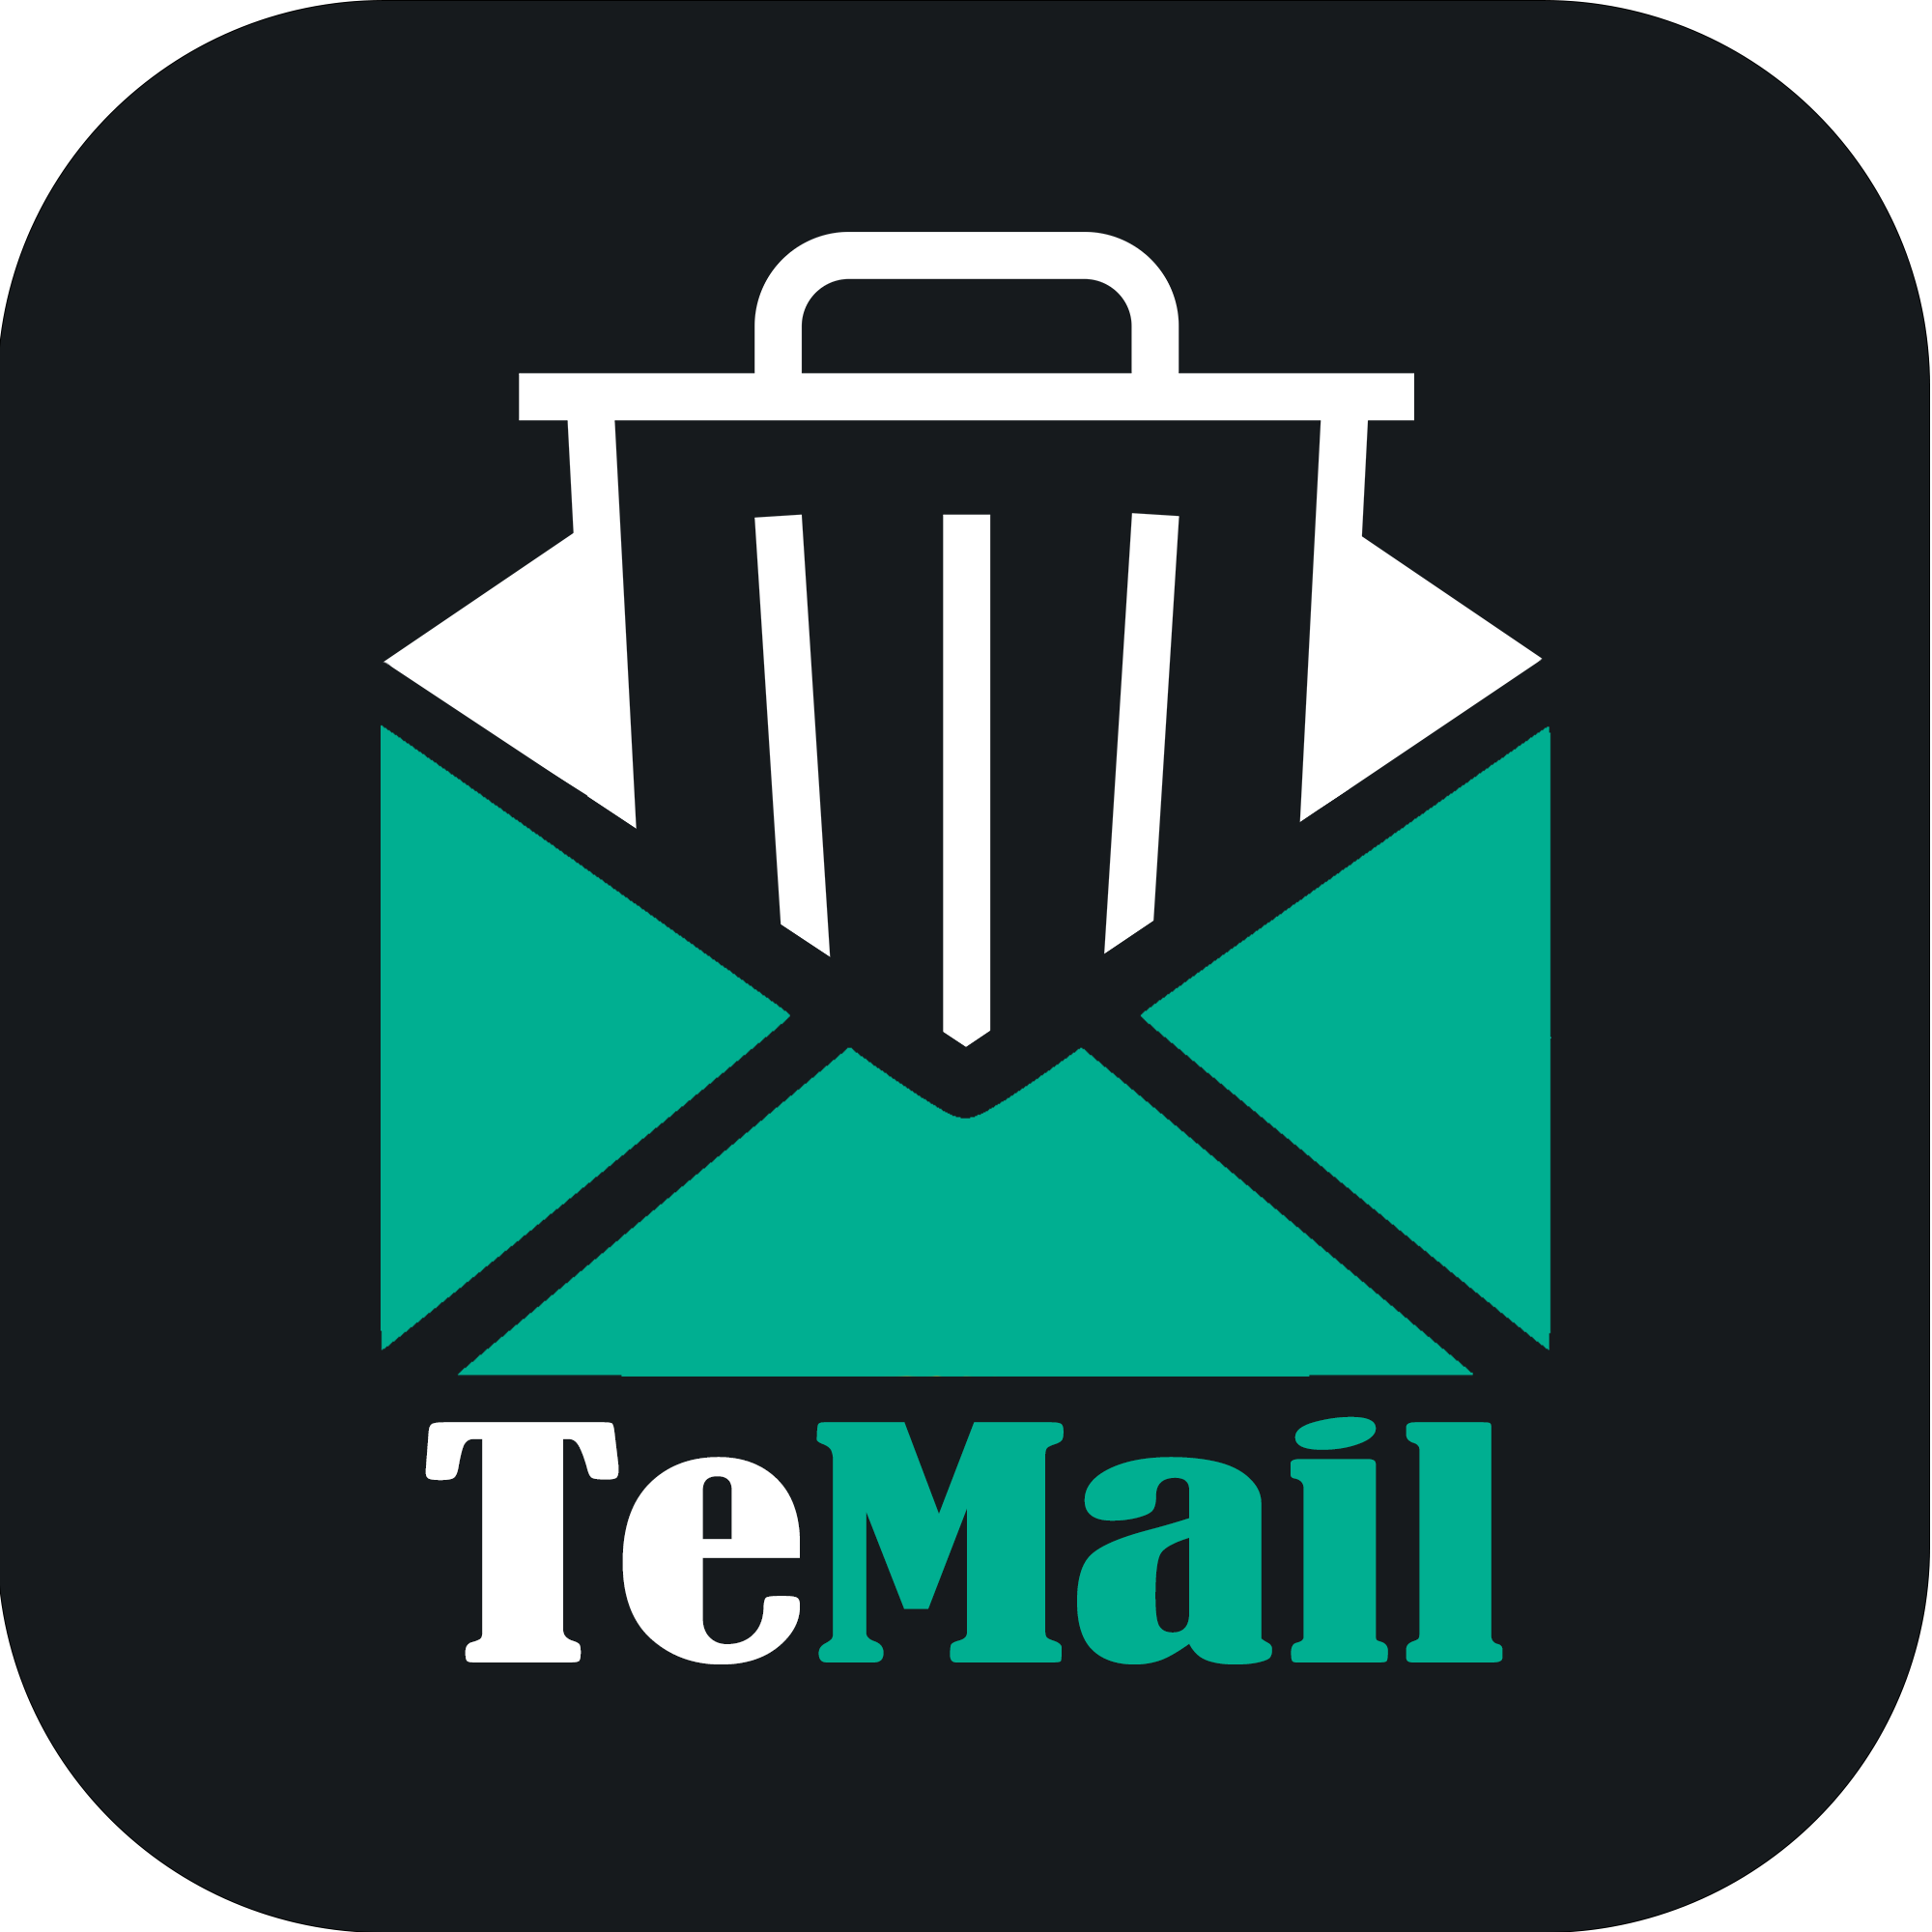 temail.pro